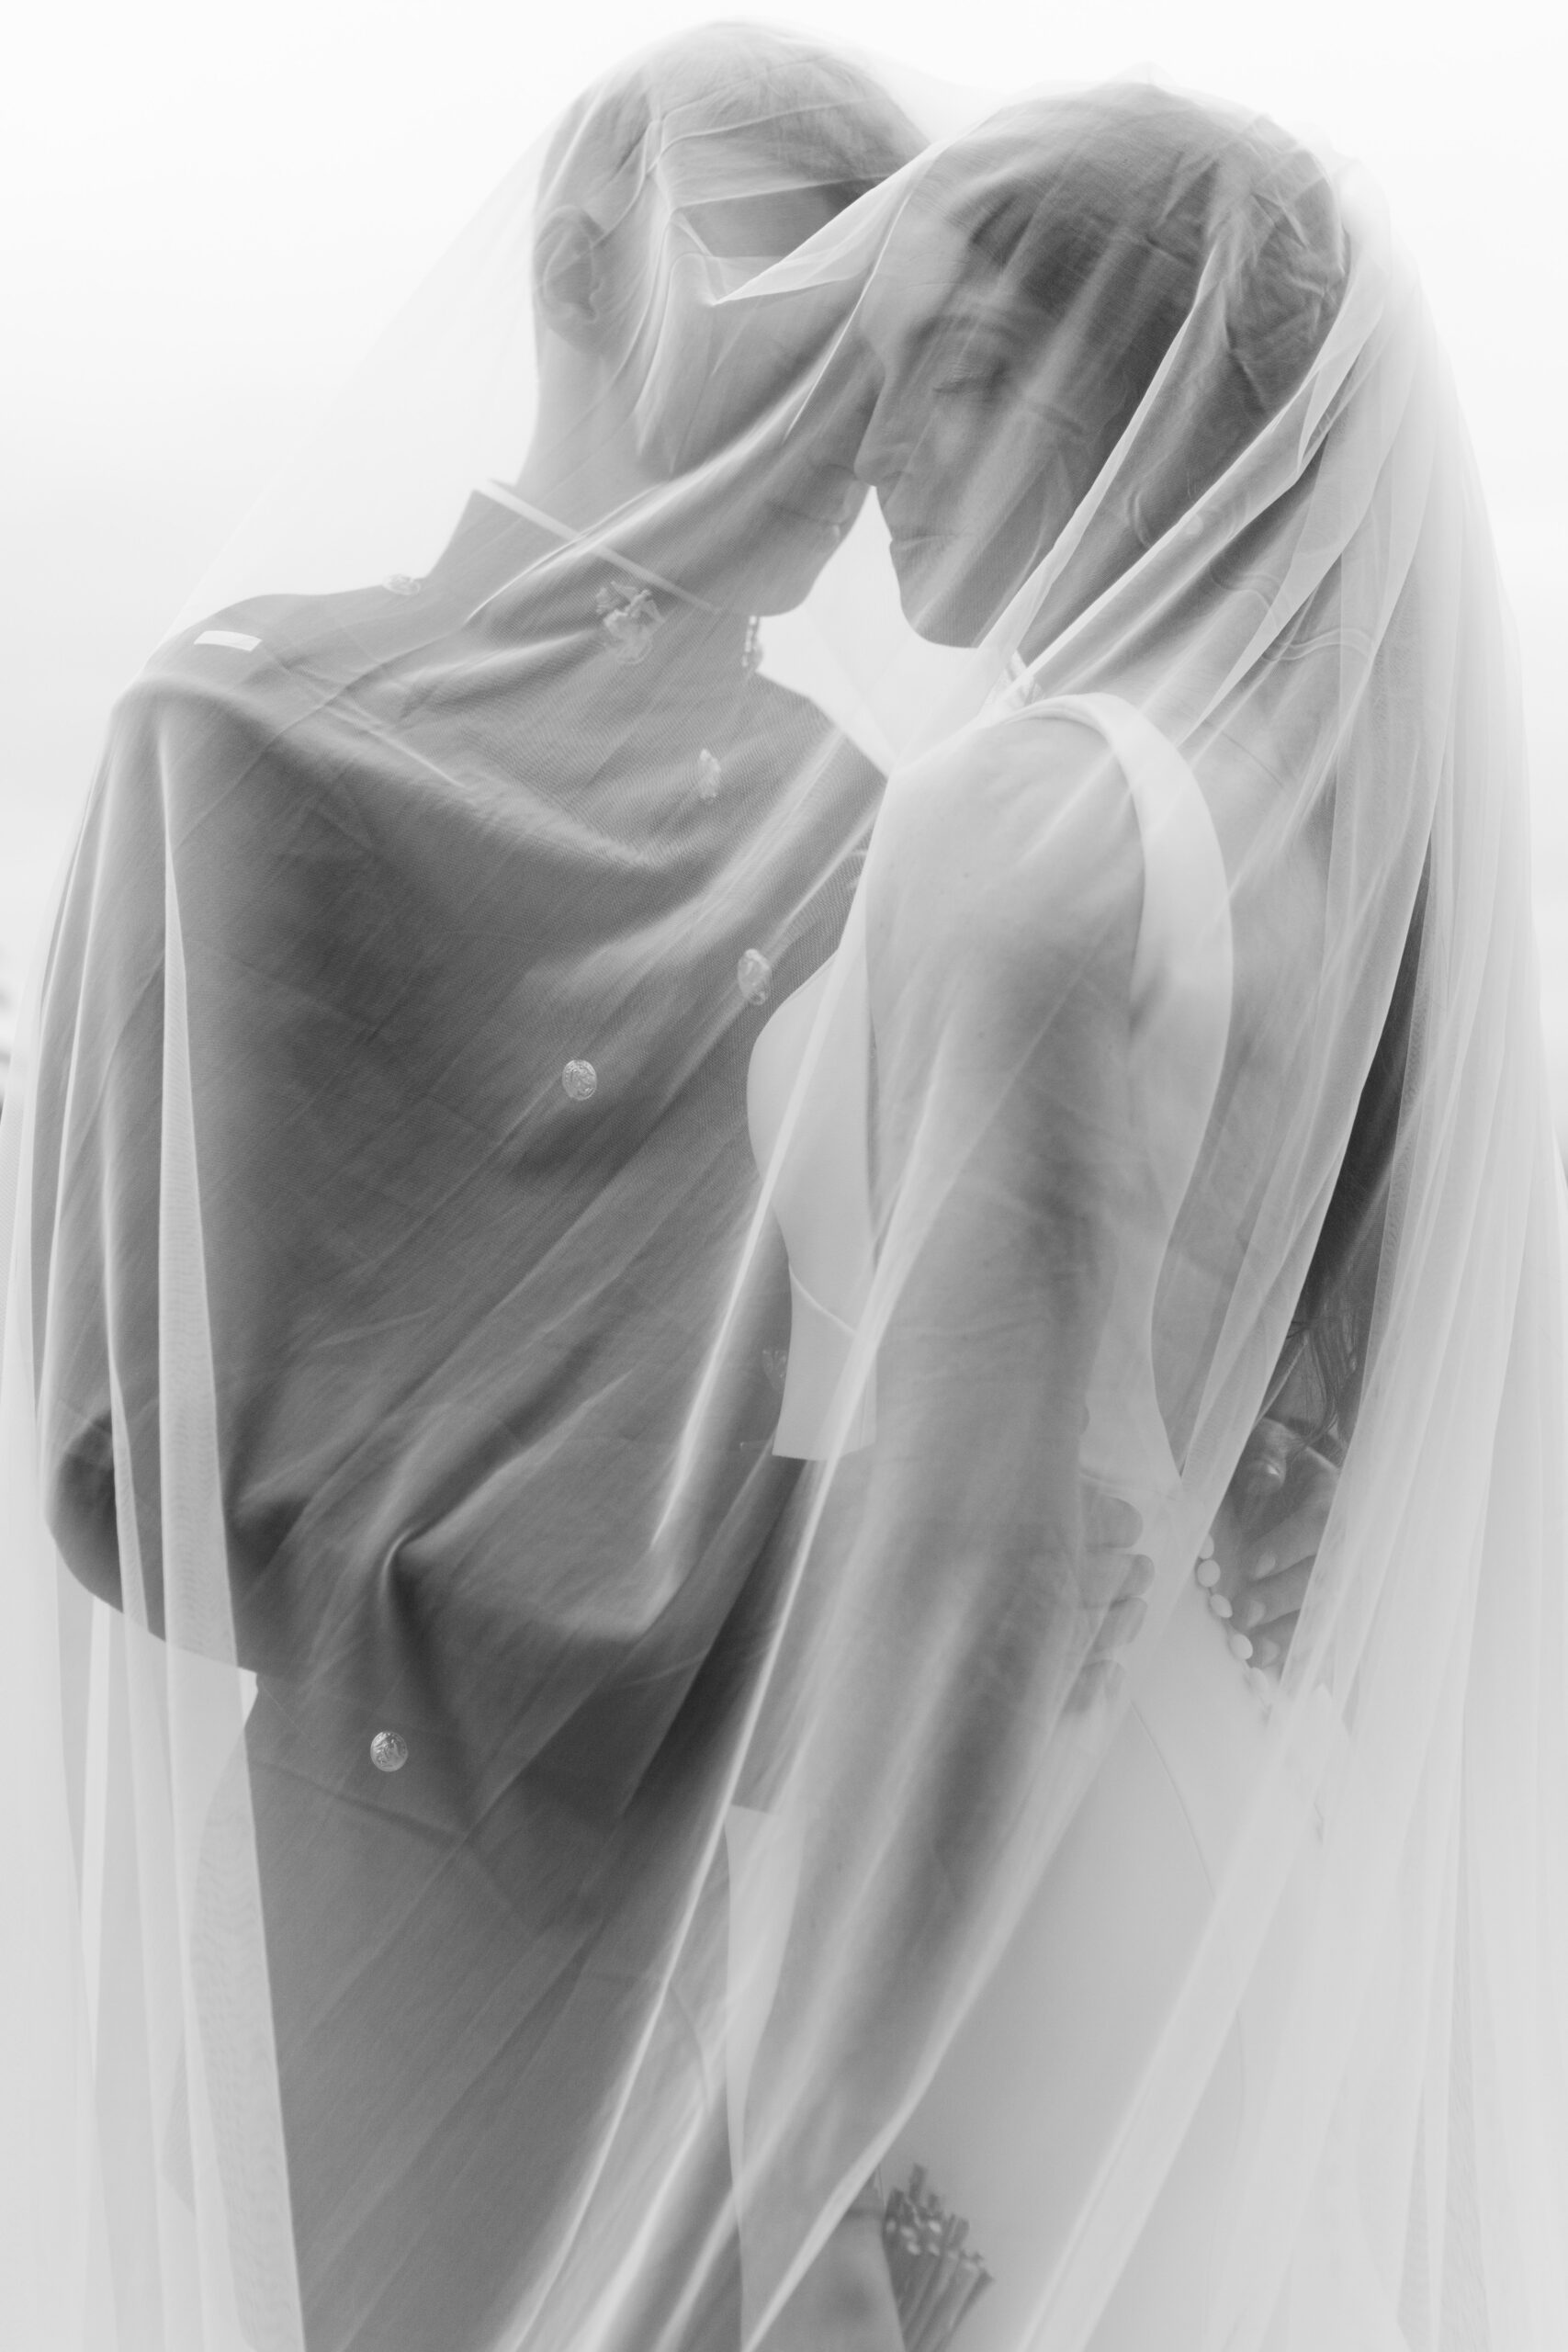 Black and white photo of bride and groom embracing covered in her veil.